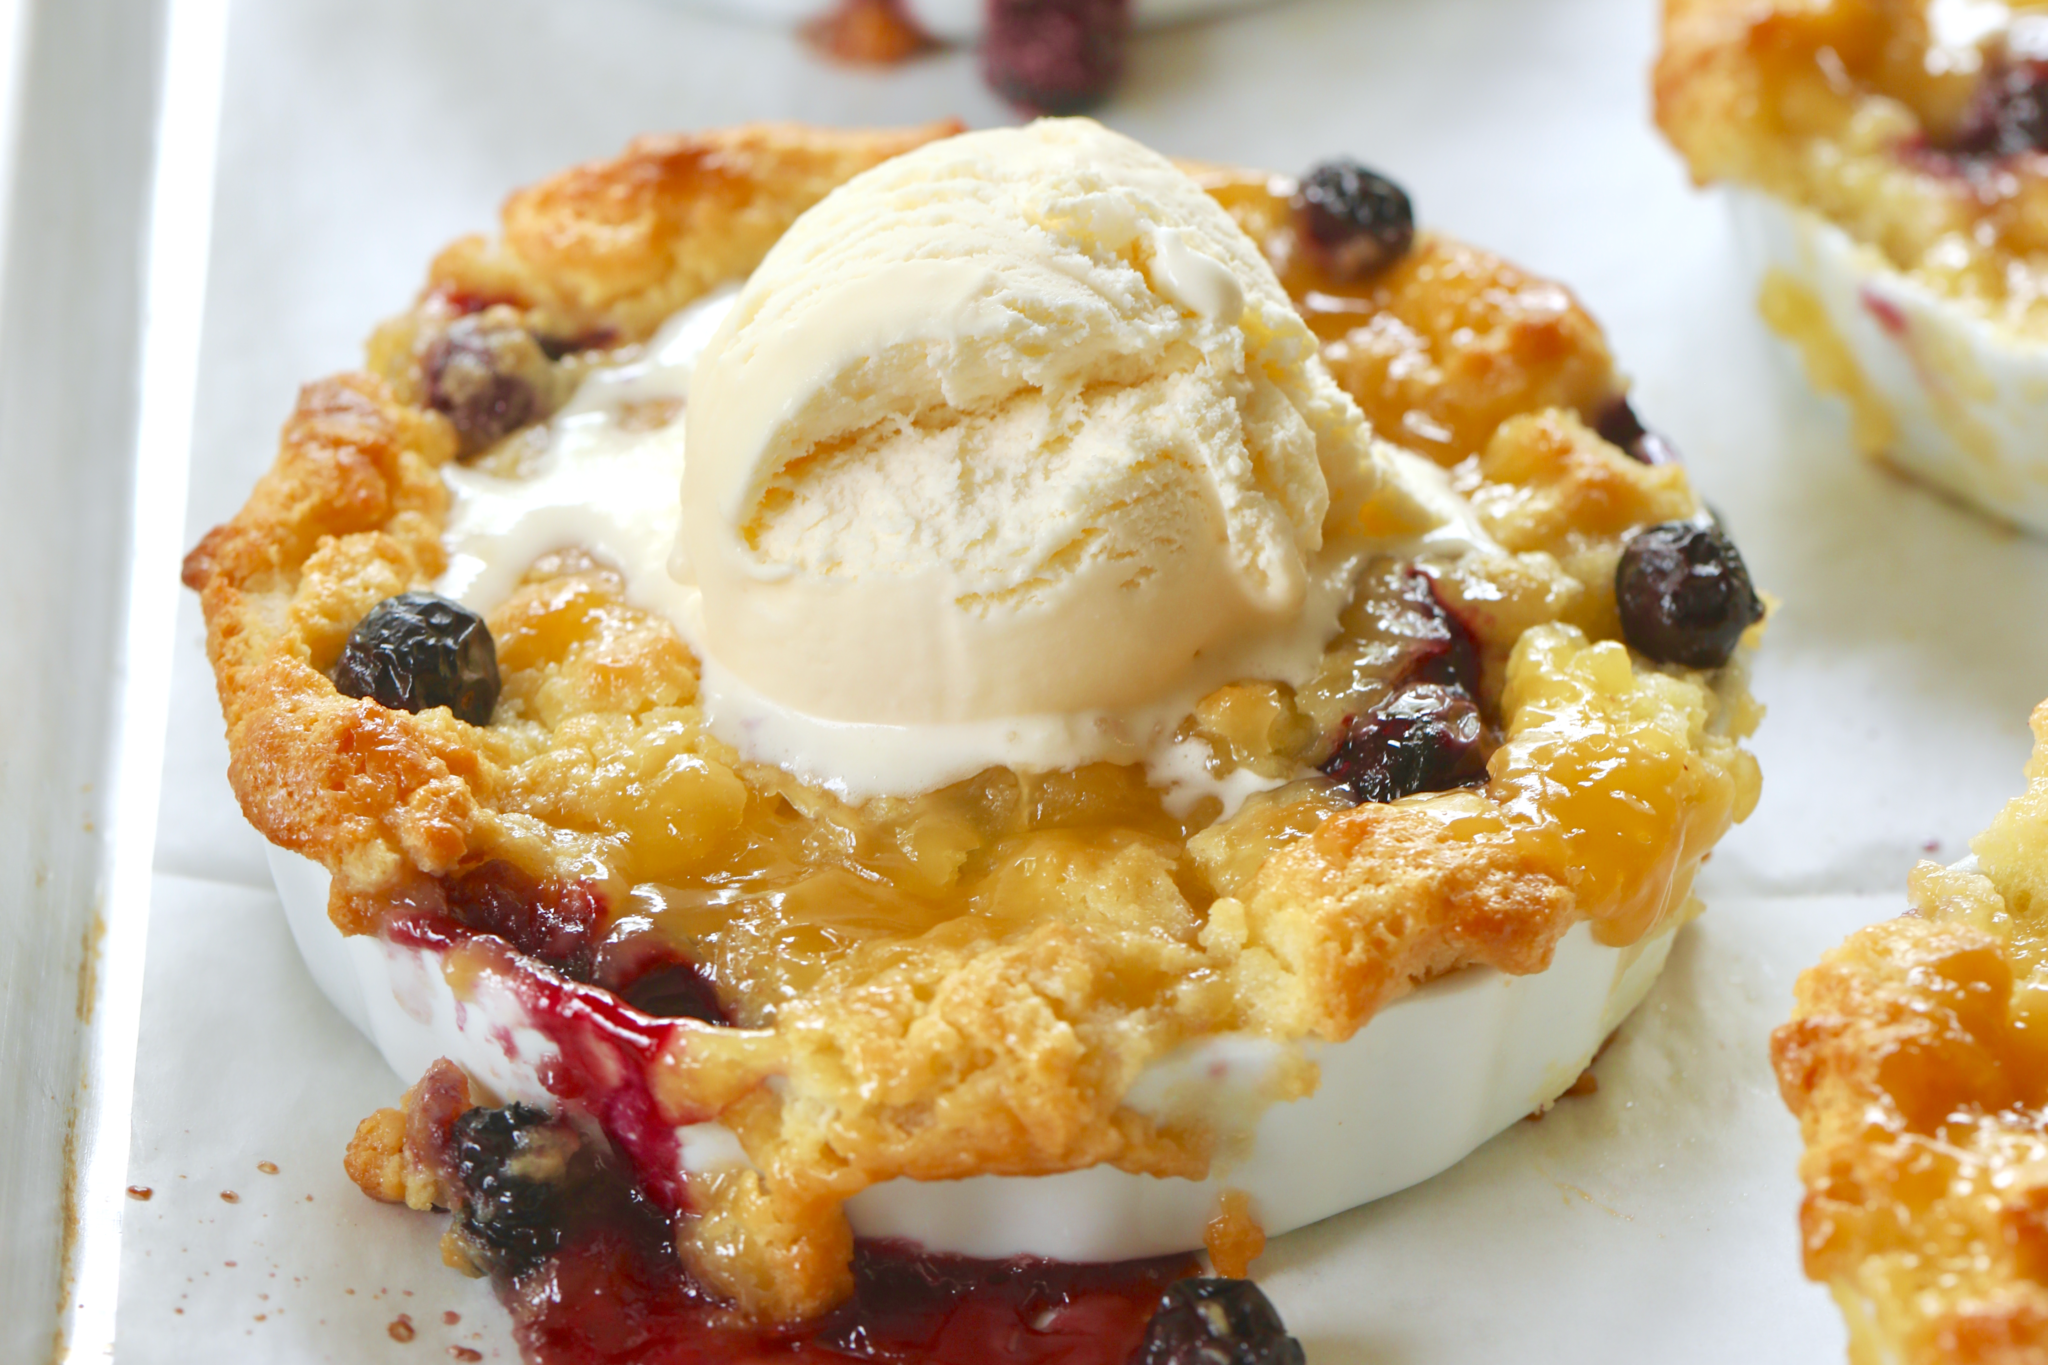 Blueberry & Lemon Curd Bread Pudding topped with vanilla ice cream